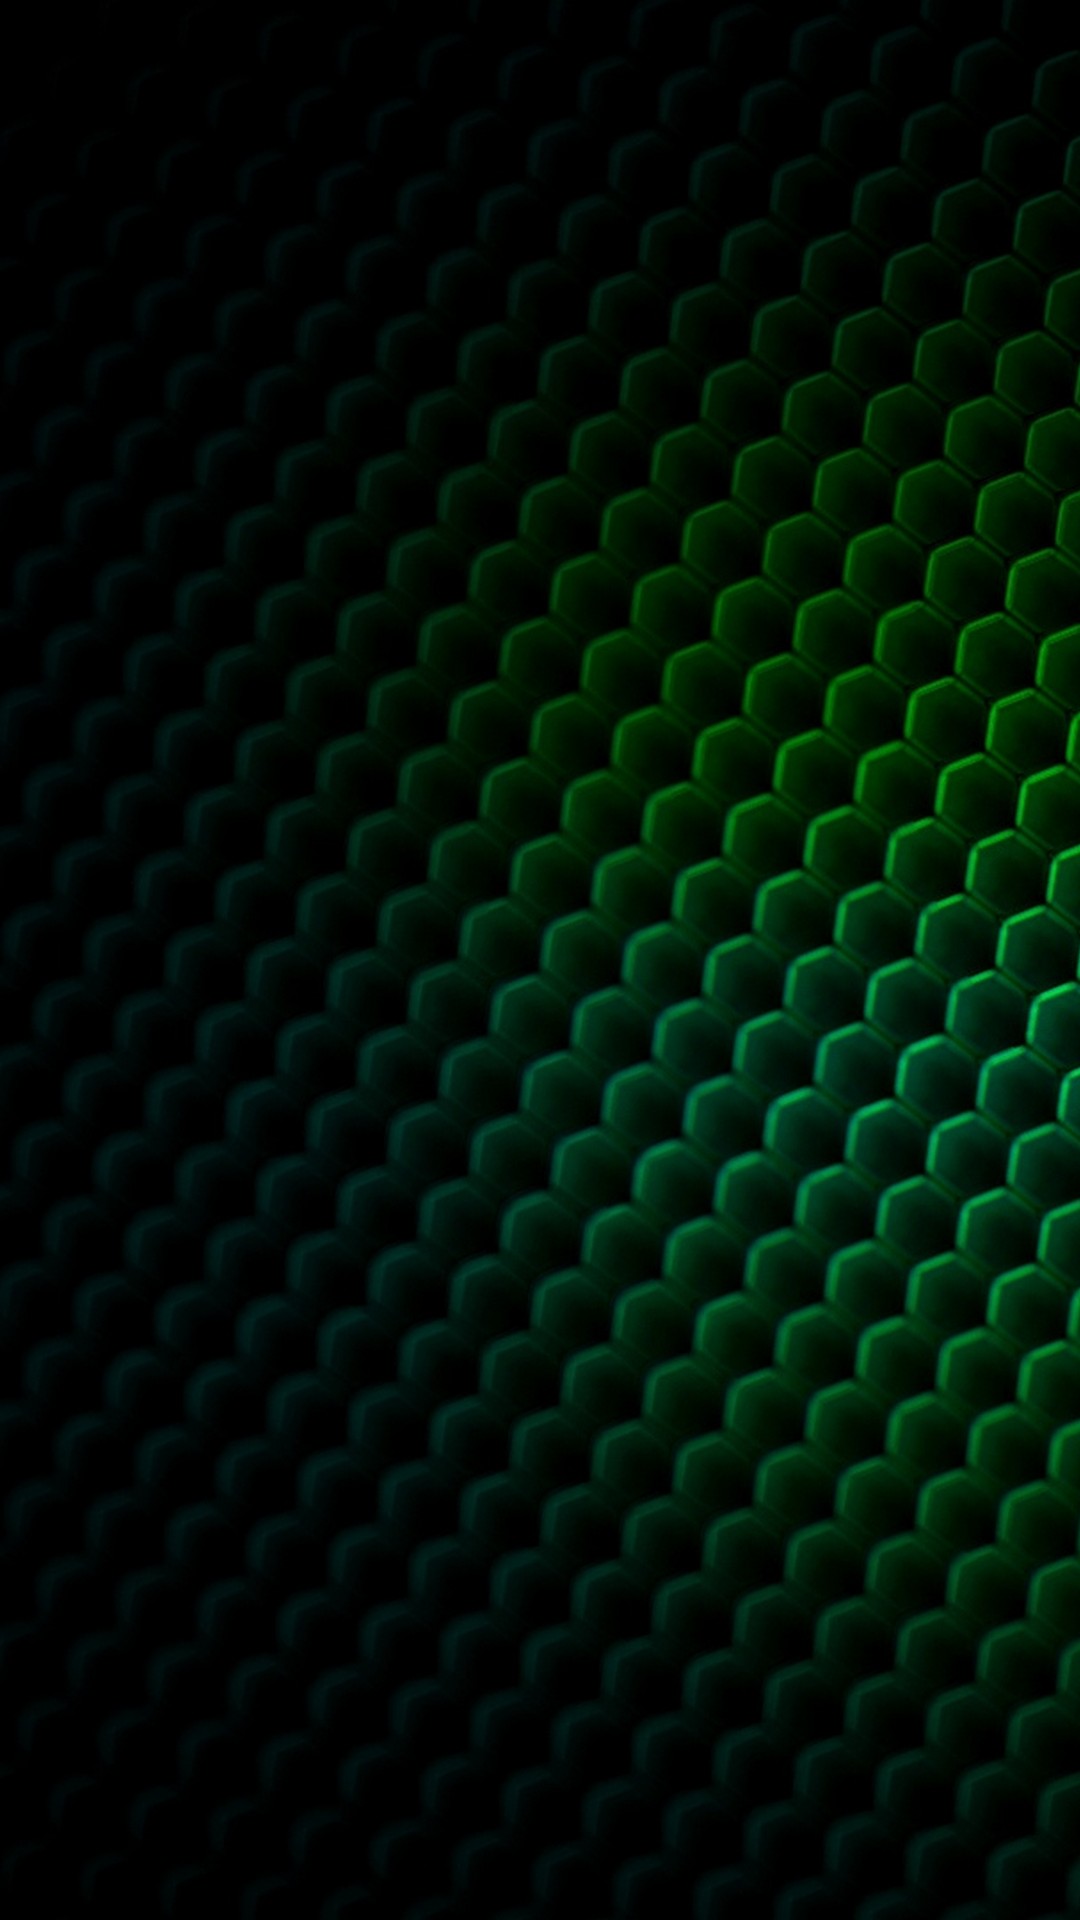 Black and Green Wallpaper For Android with image resolution 1080x1920 pixel. You can make this wallpaper for your Android backgrounds, Tablet, Smartphones Screensavers and Mobile Phone Lock Screen